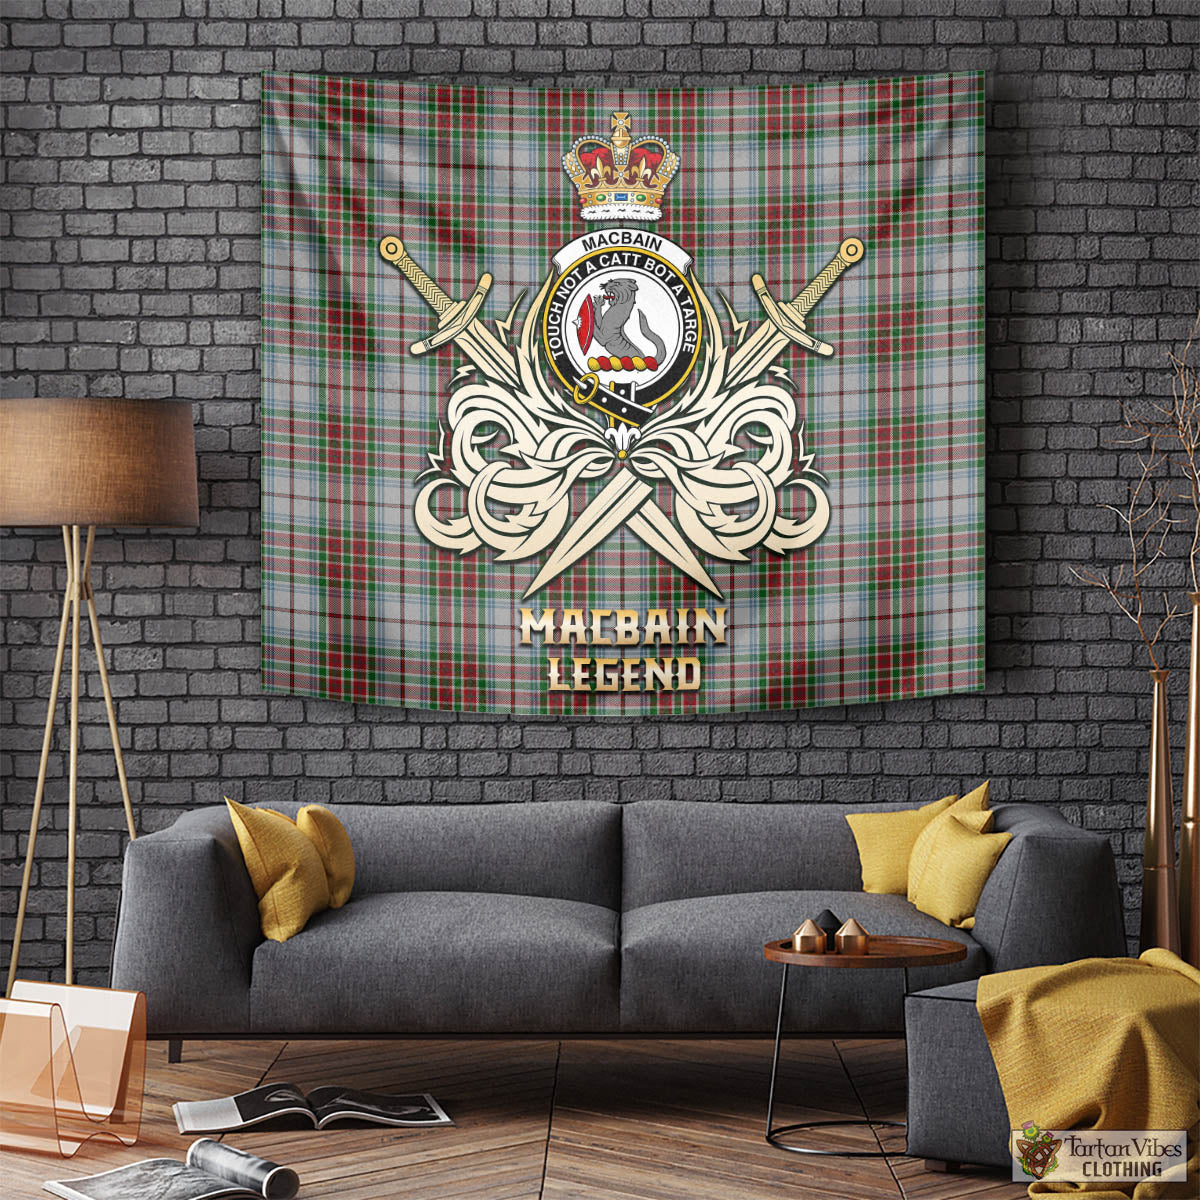 Tartan Vibes Clothing MacBain Dress Tartan Tapestry with Clan Crest and the Golden Sword of Courageous Legacy